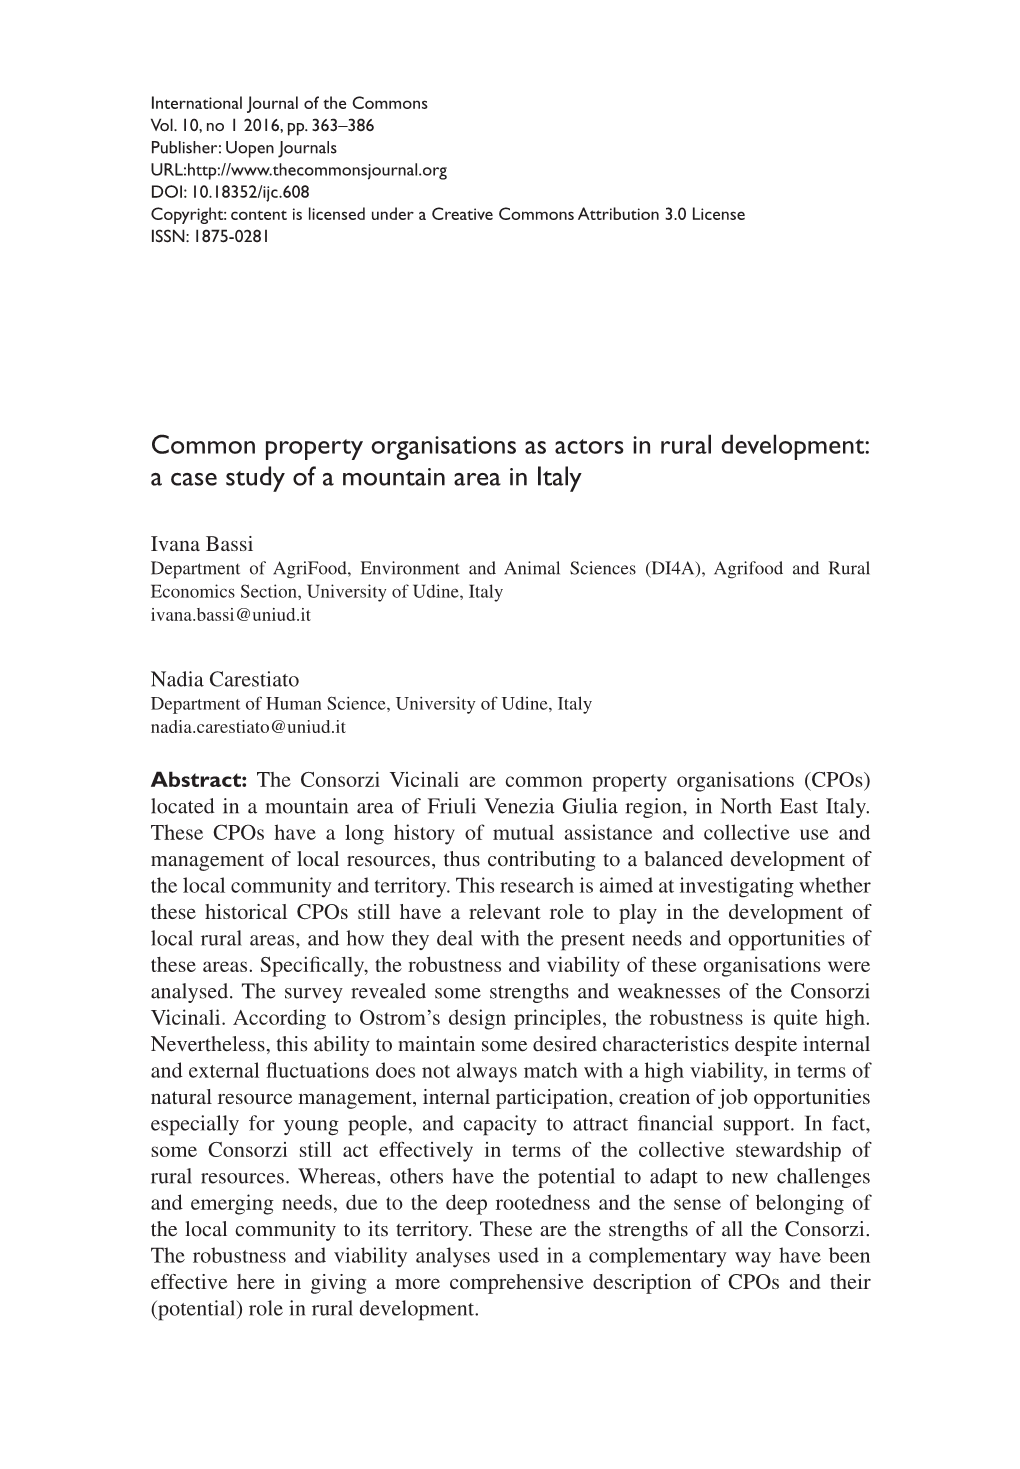 Common Property Organisations As Actors in Rural Development: a Case Study of a Mountain Area in Italy